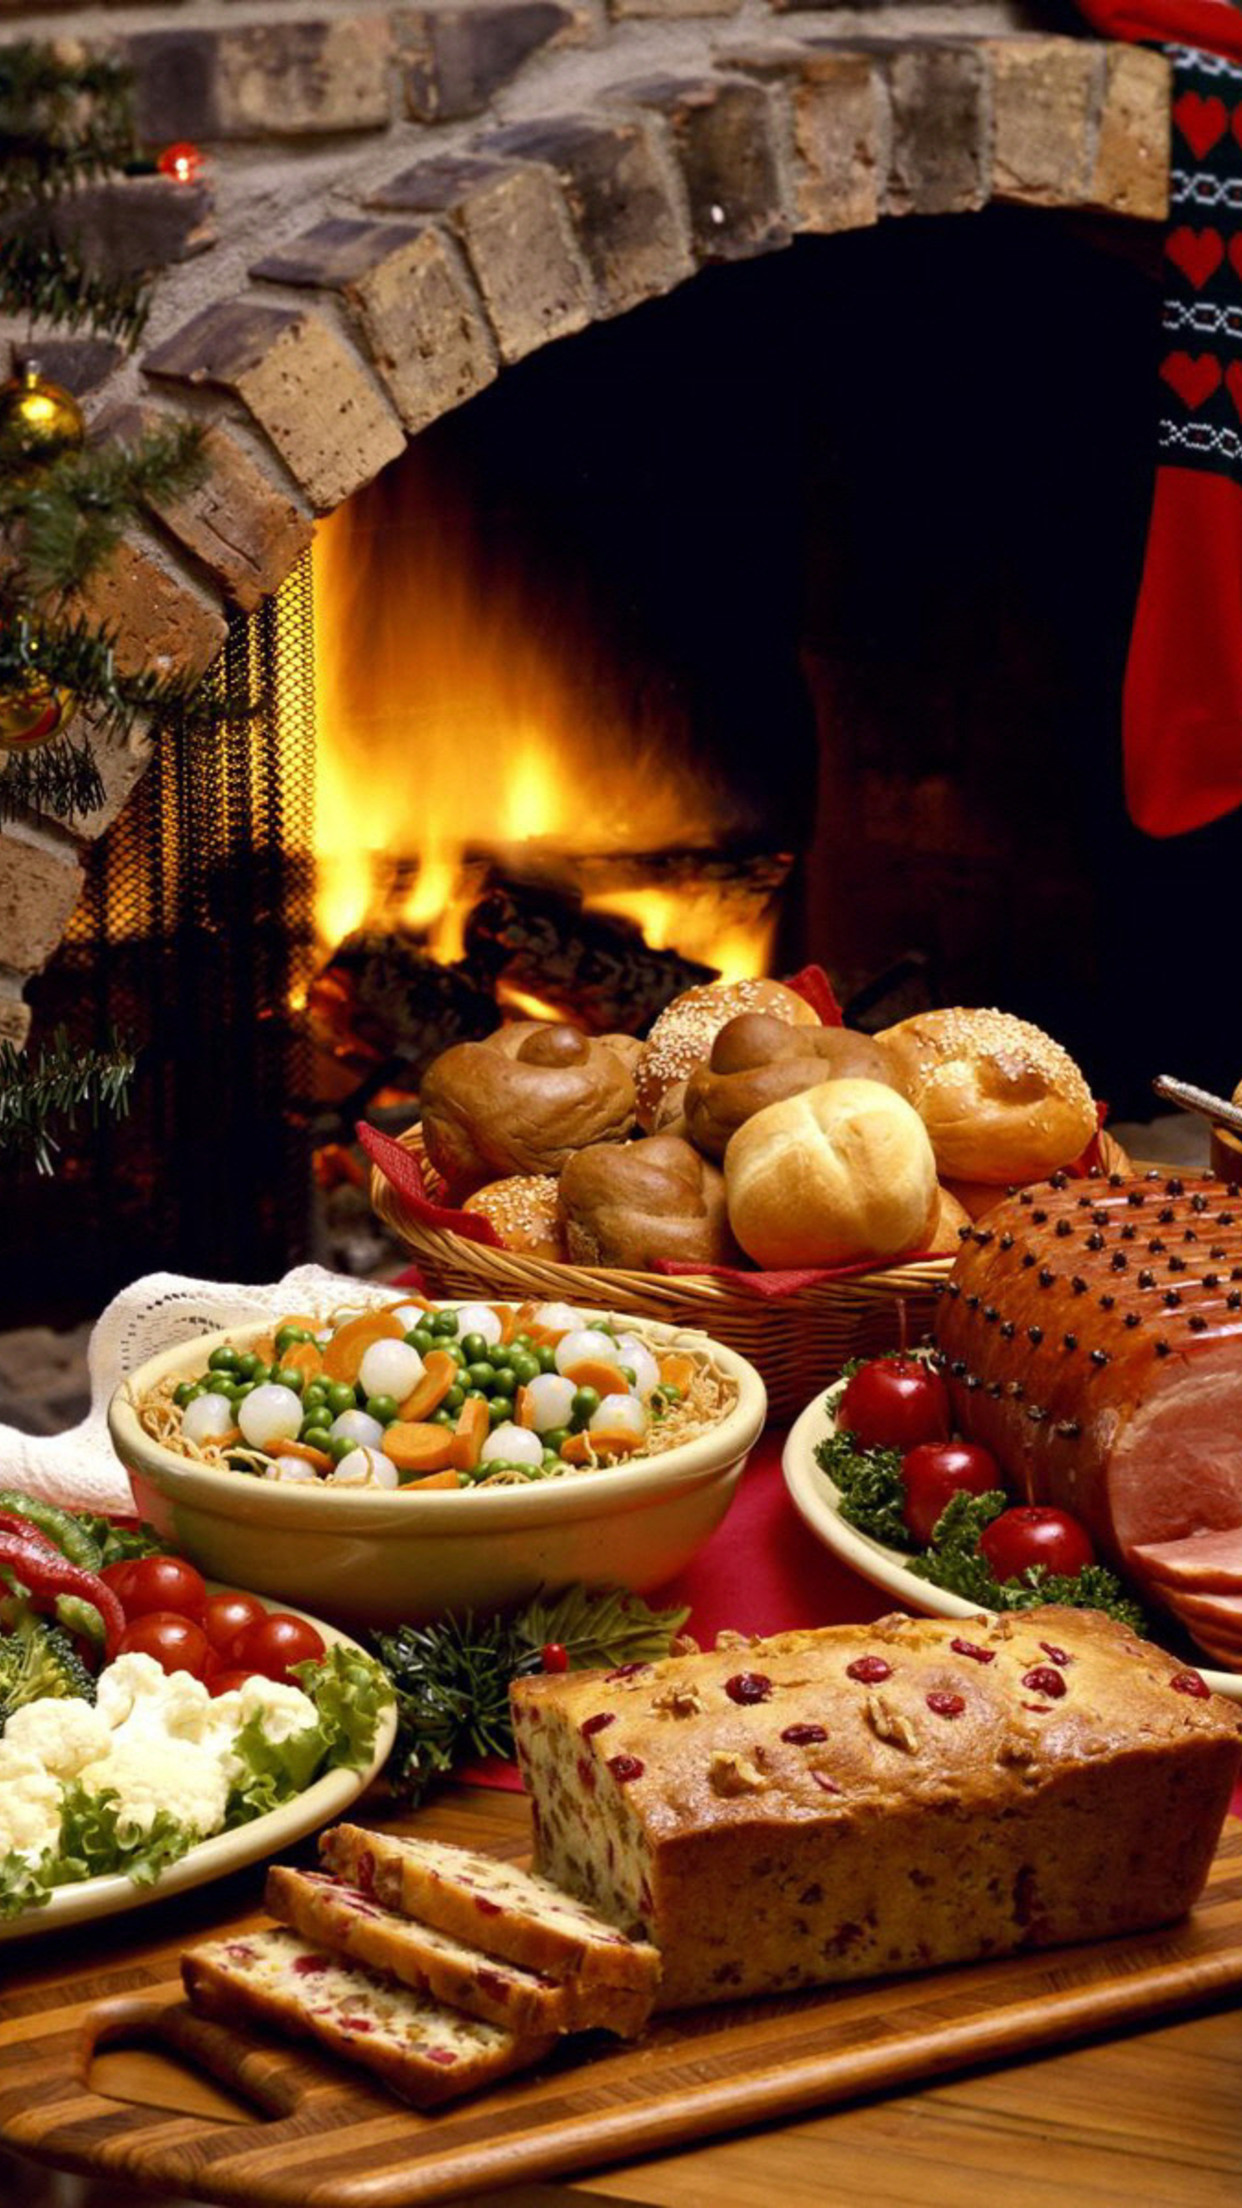 Food Fireplace Wallpaper for iPhone Pro Max, X, 6